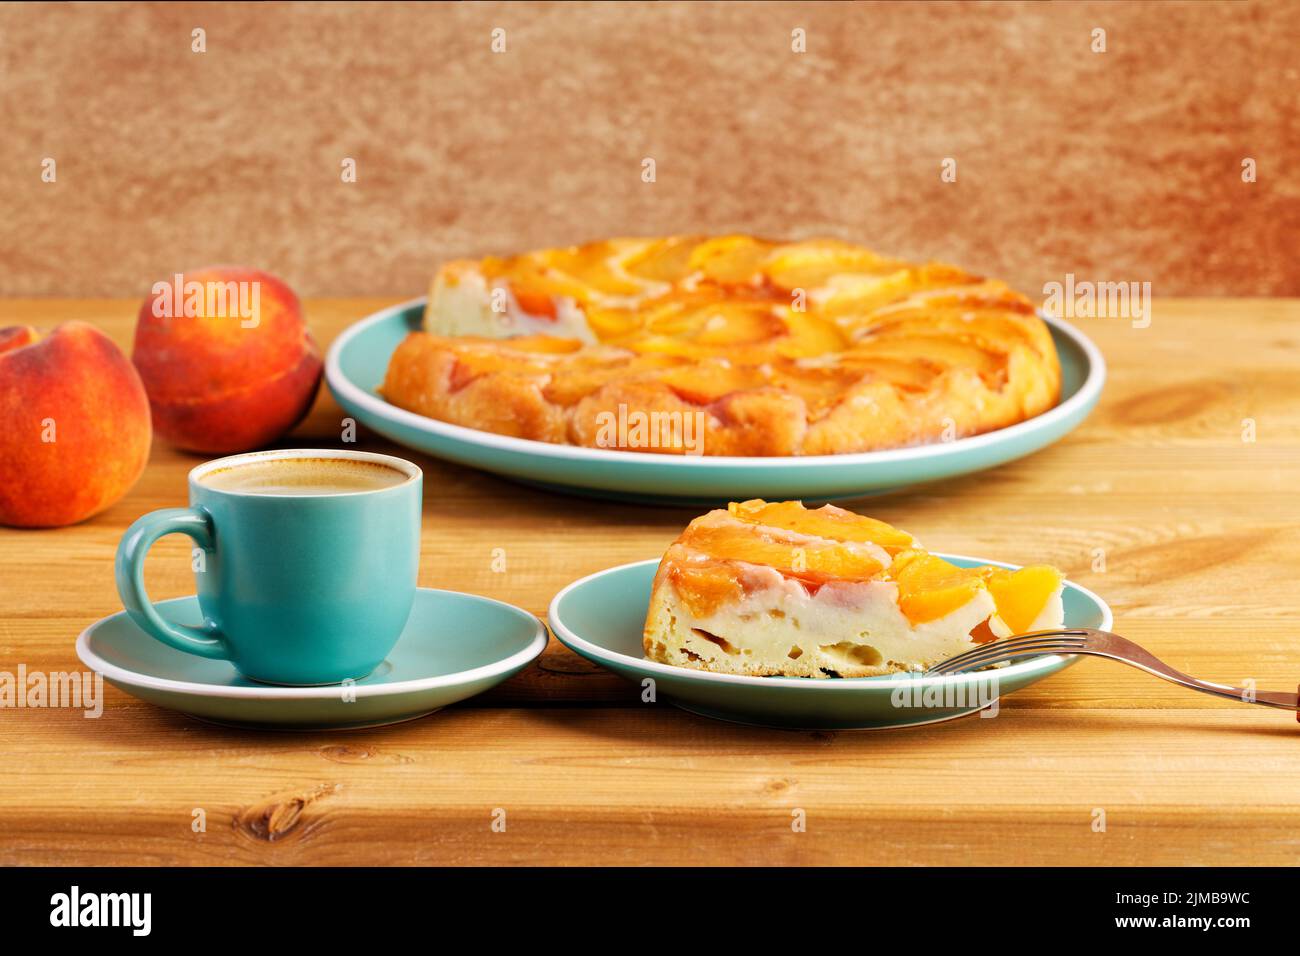 Homemade pie with peaches and cup of coffee espresso on wooden table. Shallow focus. Stock Photo